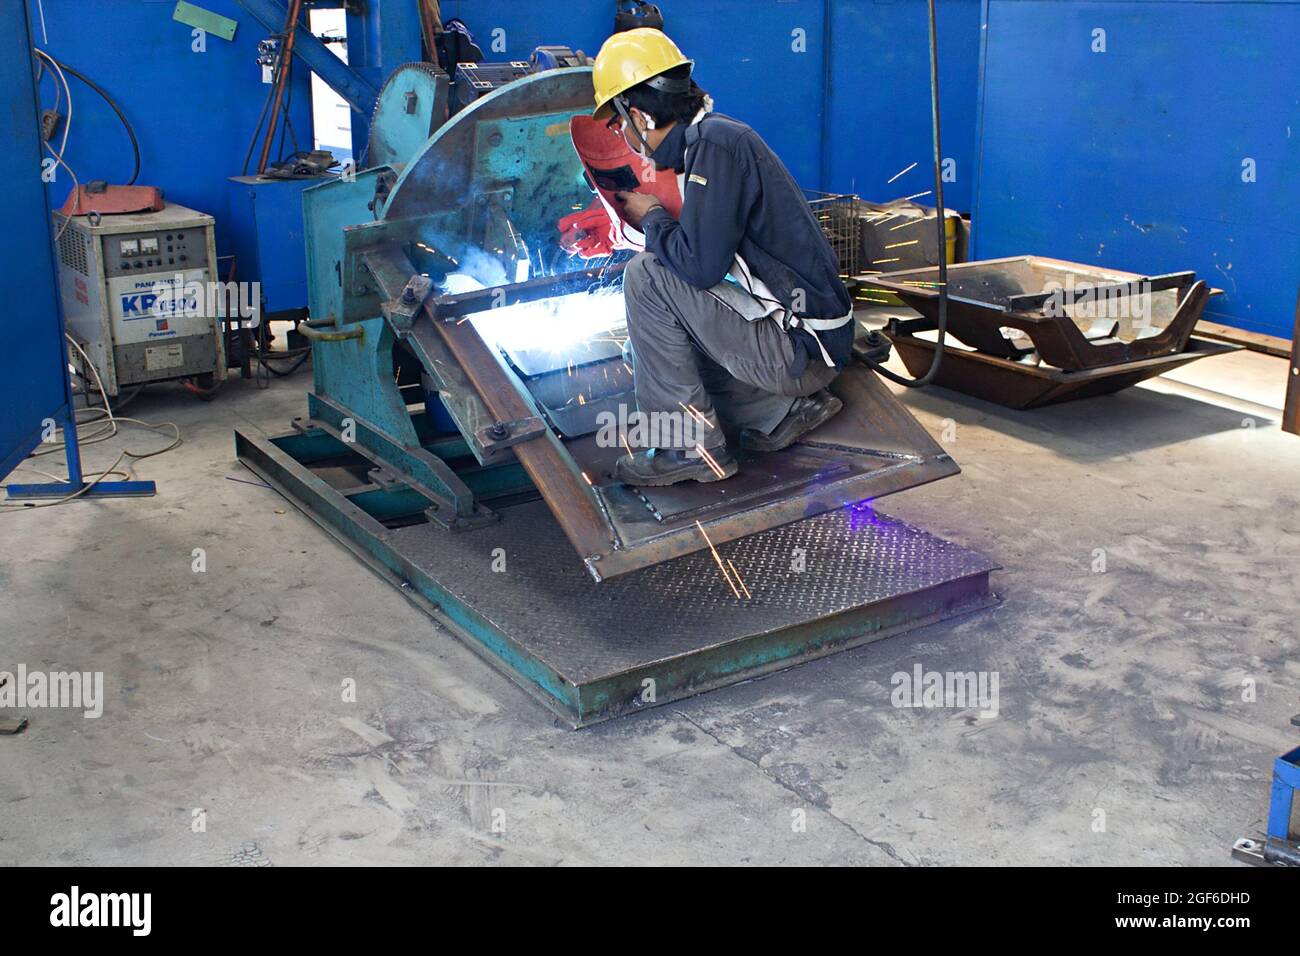 A welder is using an electric arc welding machine in a fabrication workshop. Stock Photo